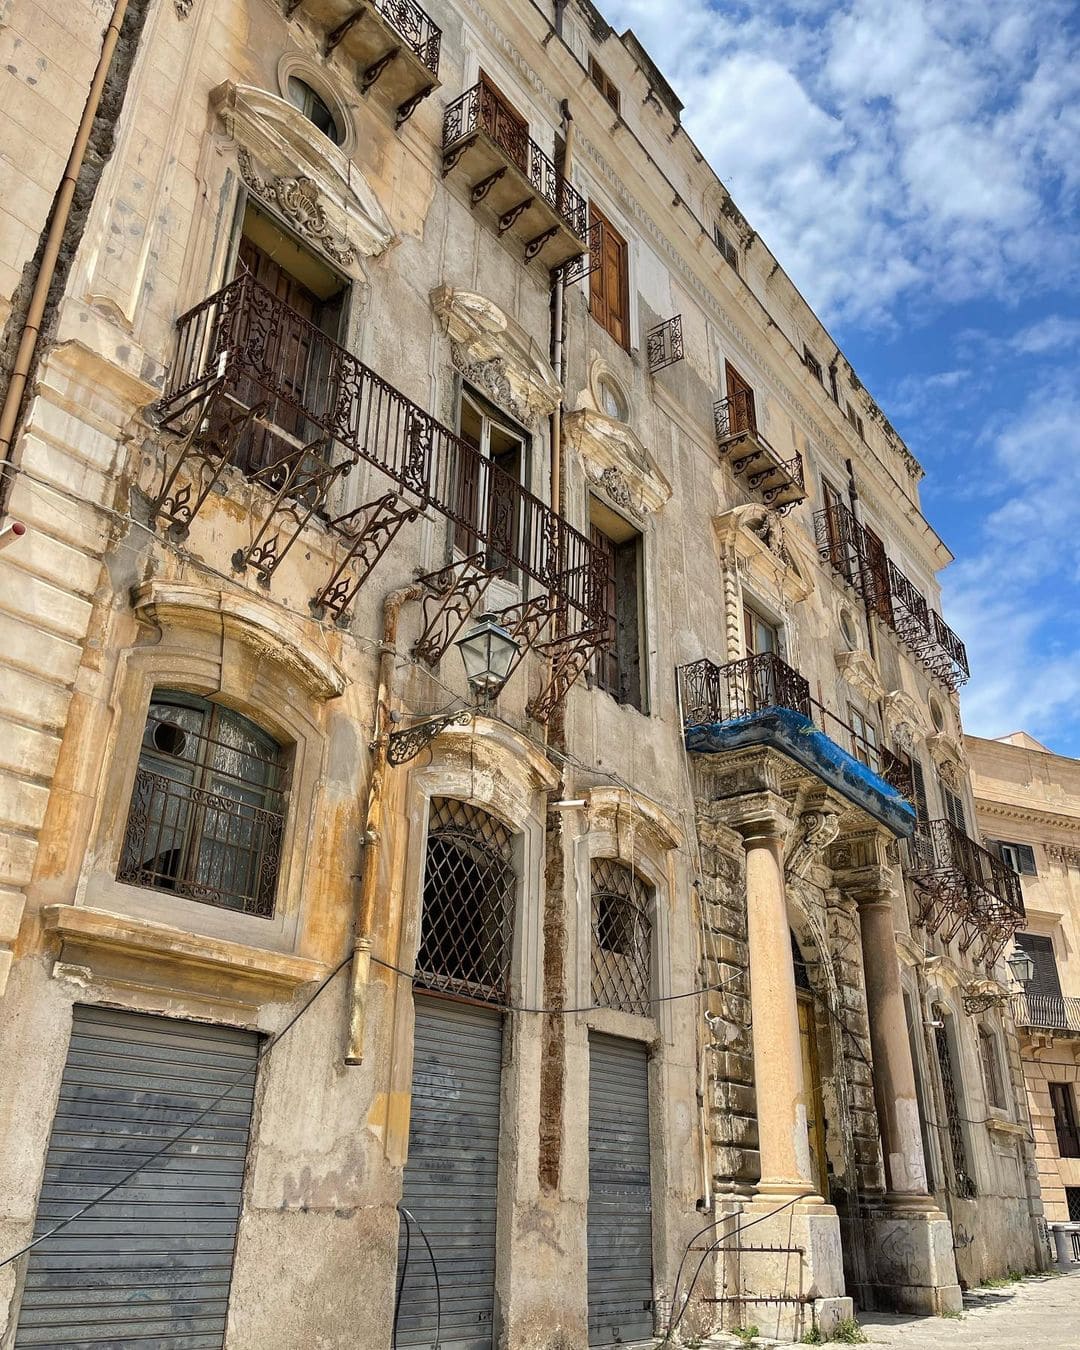 Renting a Car in Sicily: Your Complete Guide for Summer 2022